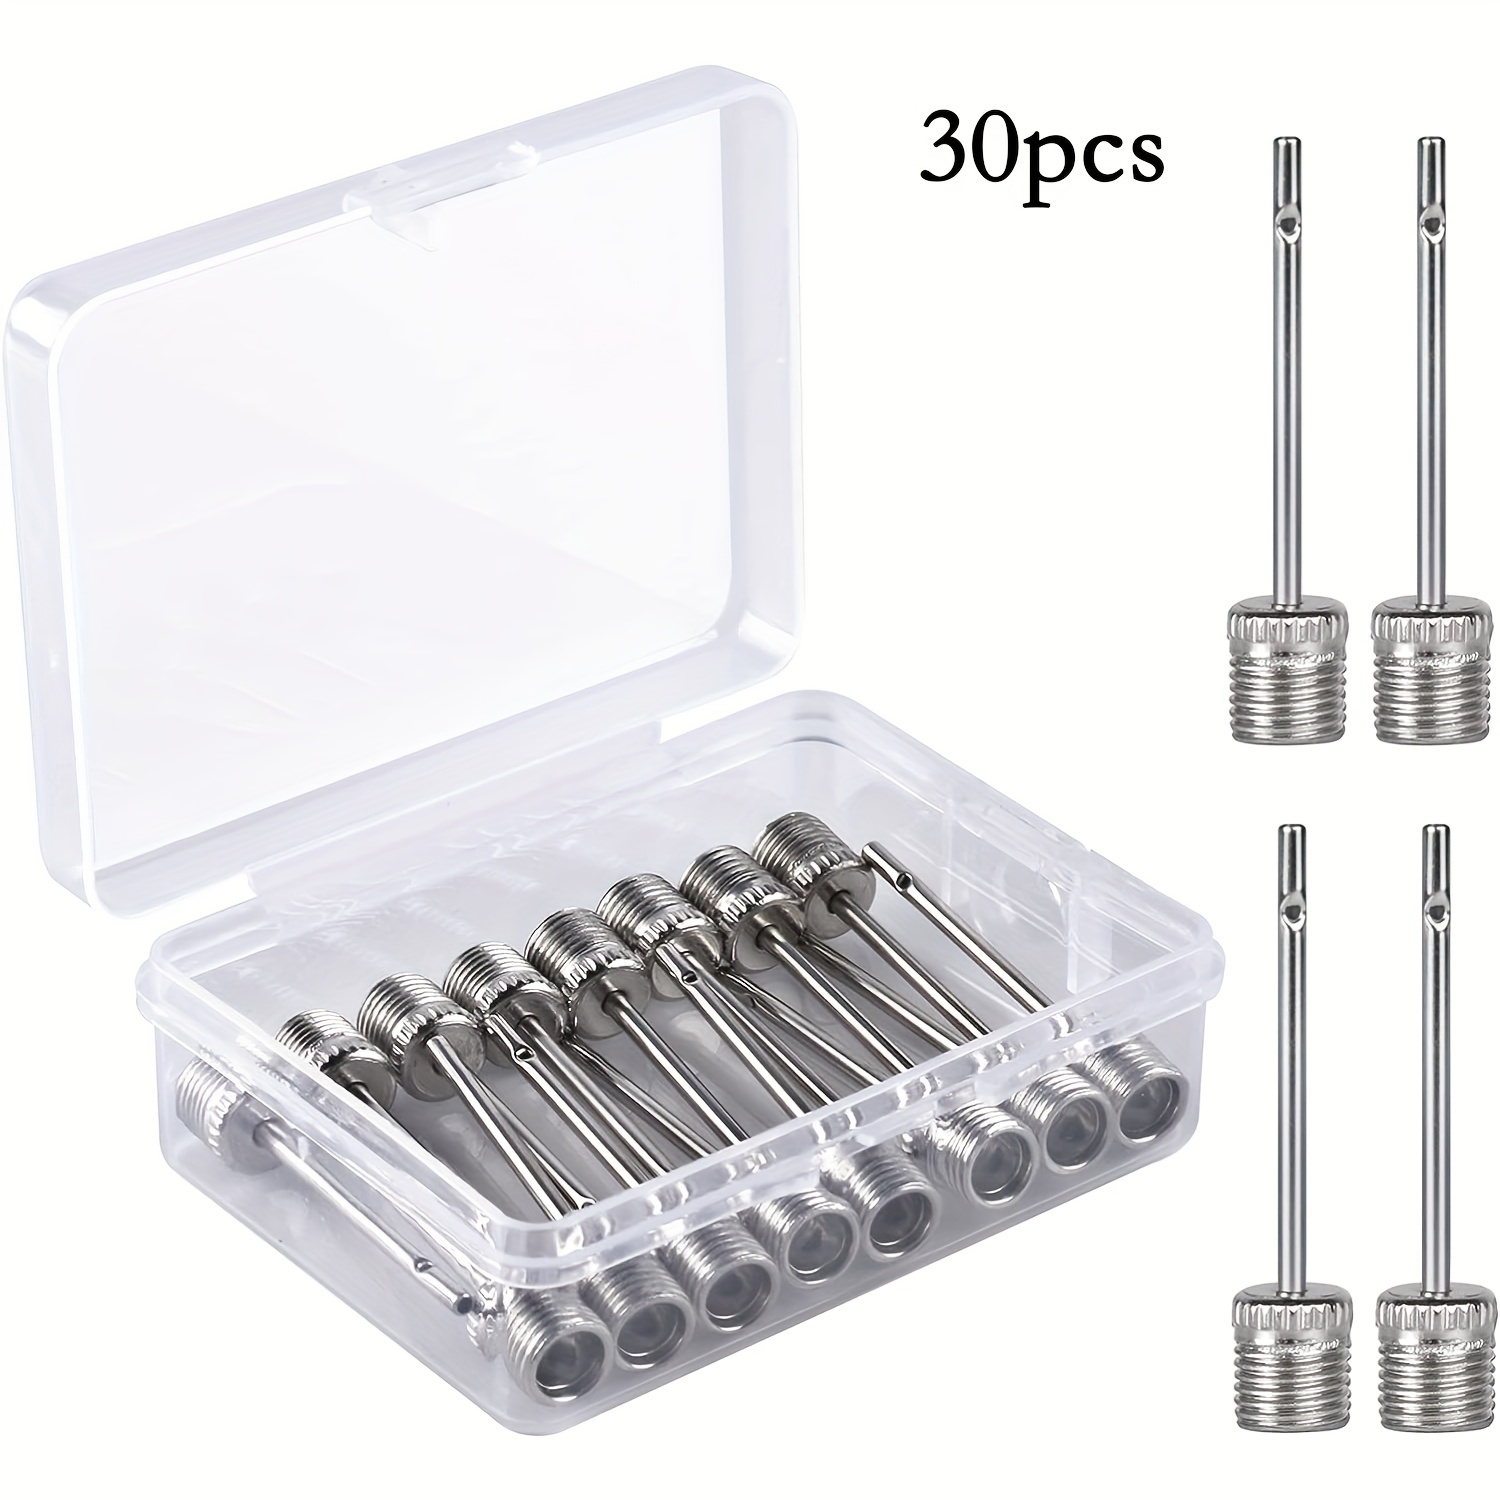 

30pcs Stainless Steel Air Pump Needle, Premium Inflation Needles, Pump Needle For Football, Basketball, Soccer, Volleyball Or Rugby With Portable Storage Box